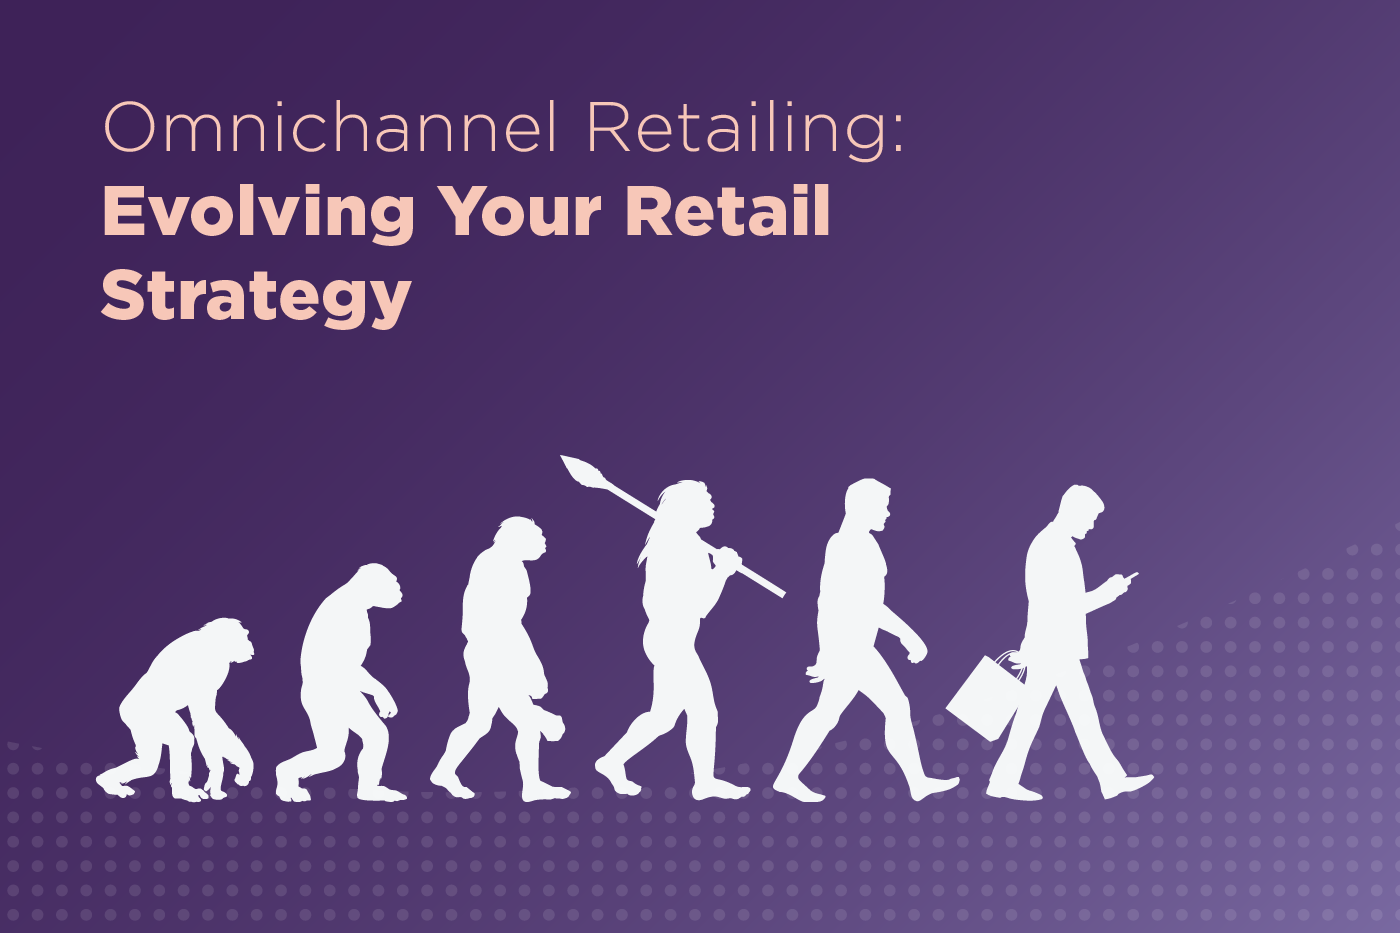 Omnichannel Ecommerce Retailing: How To Evolve Your Retail Strategy